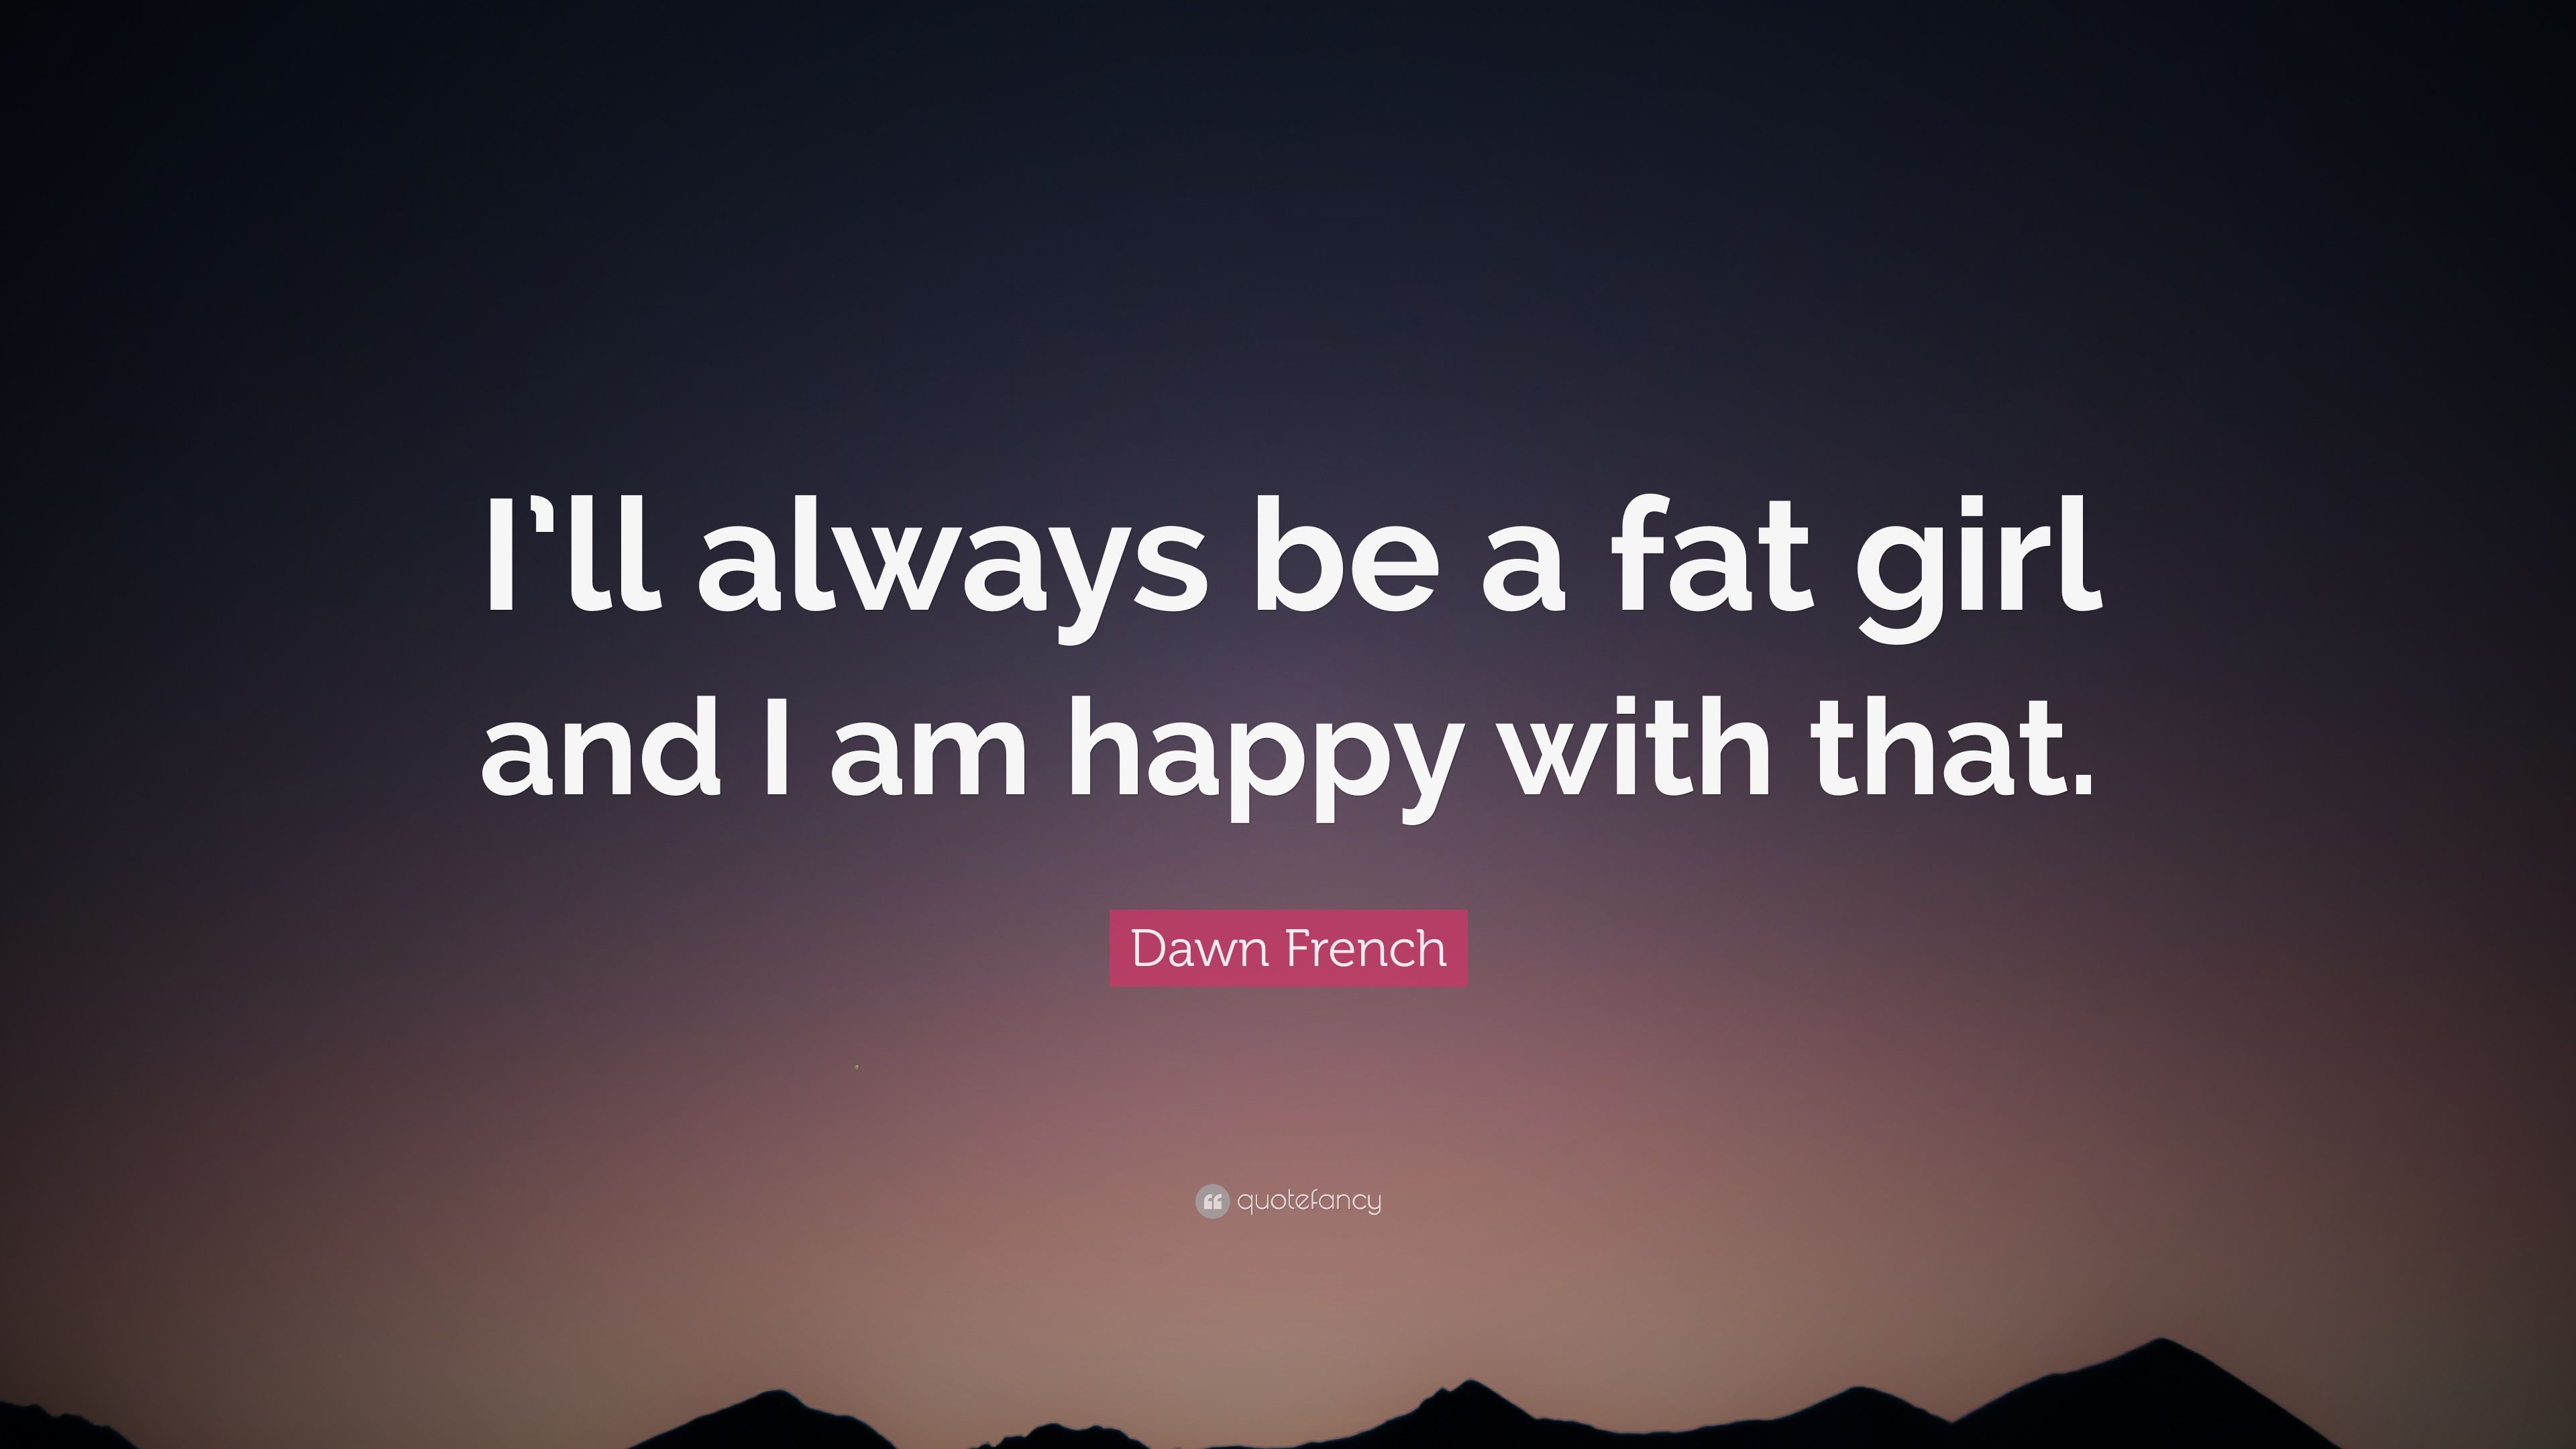 Dawn French Quote: “I'll always be a fat girl and I am happy with that.”